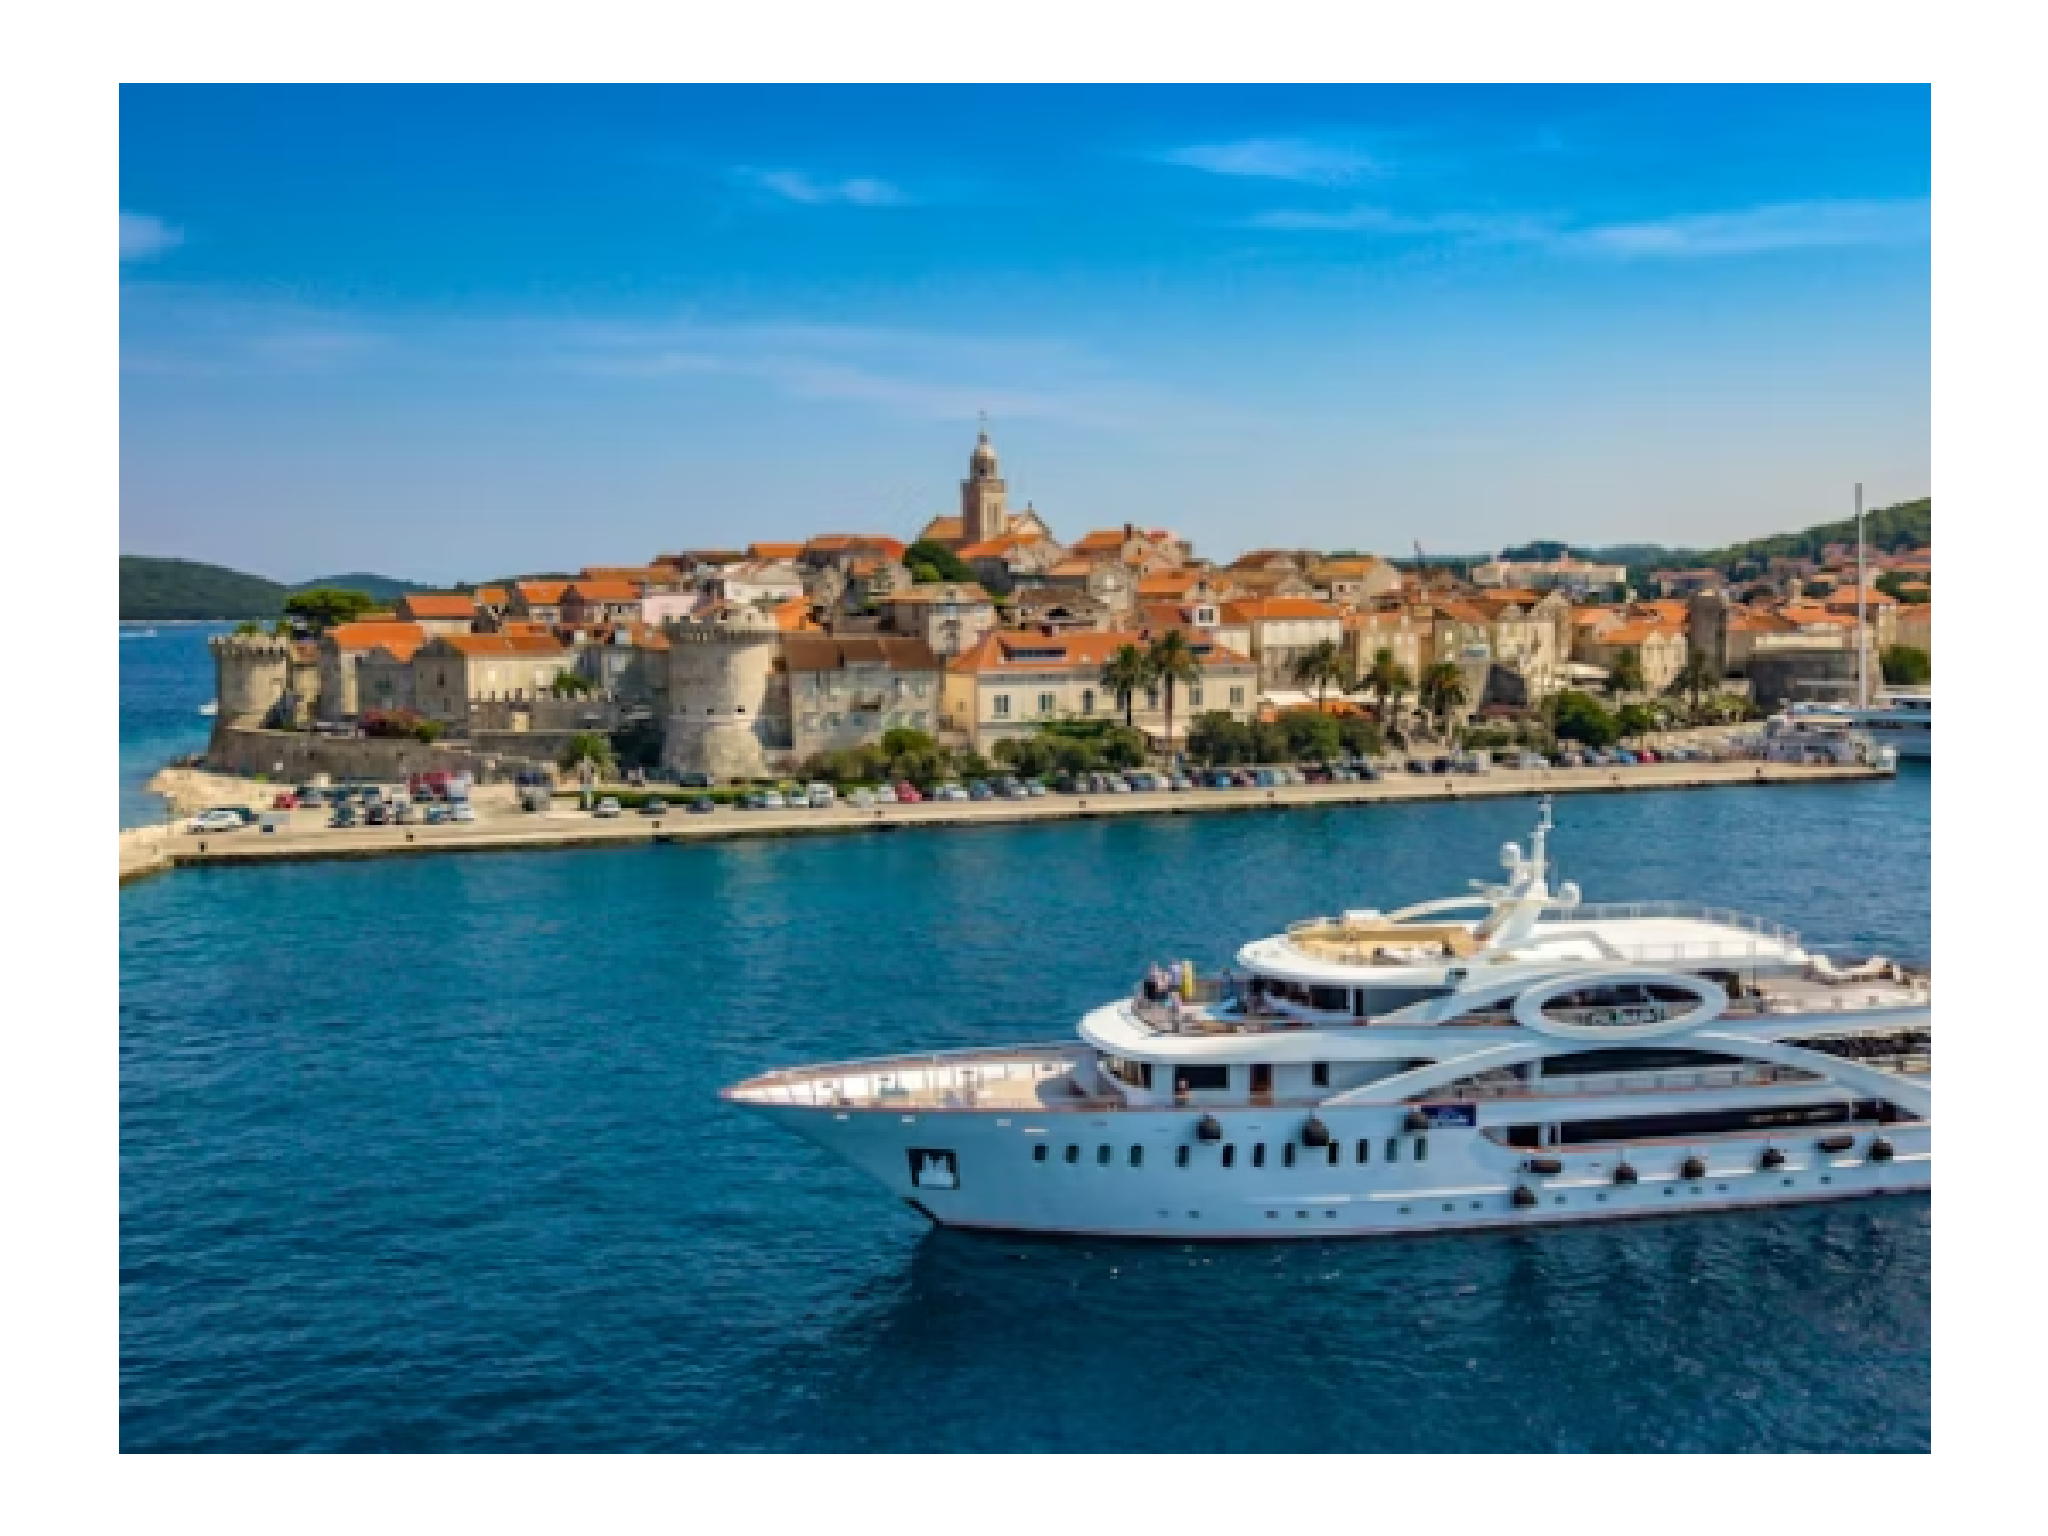 Explore ancient architecture as well as golden sands with Sail Croatia